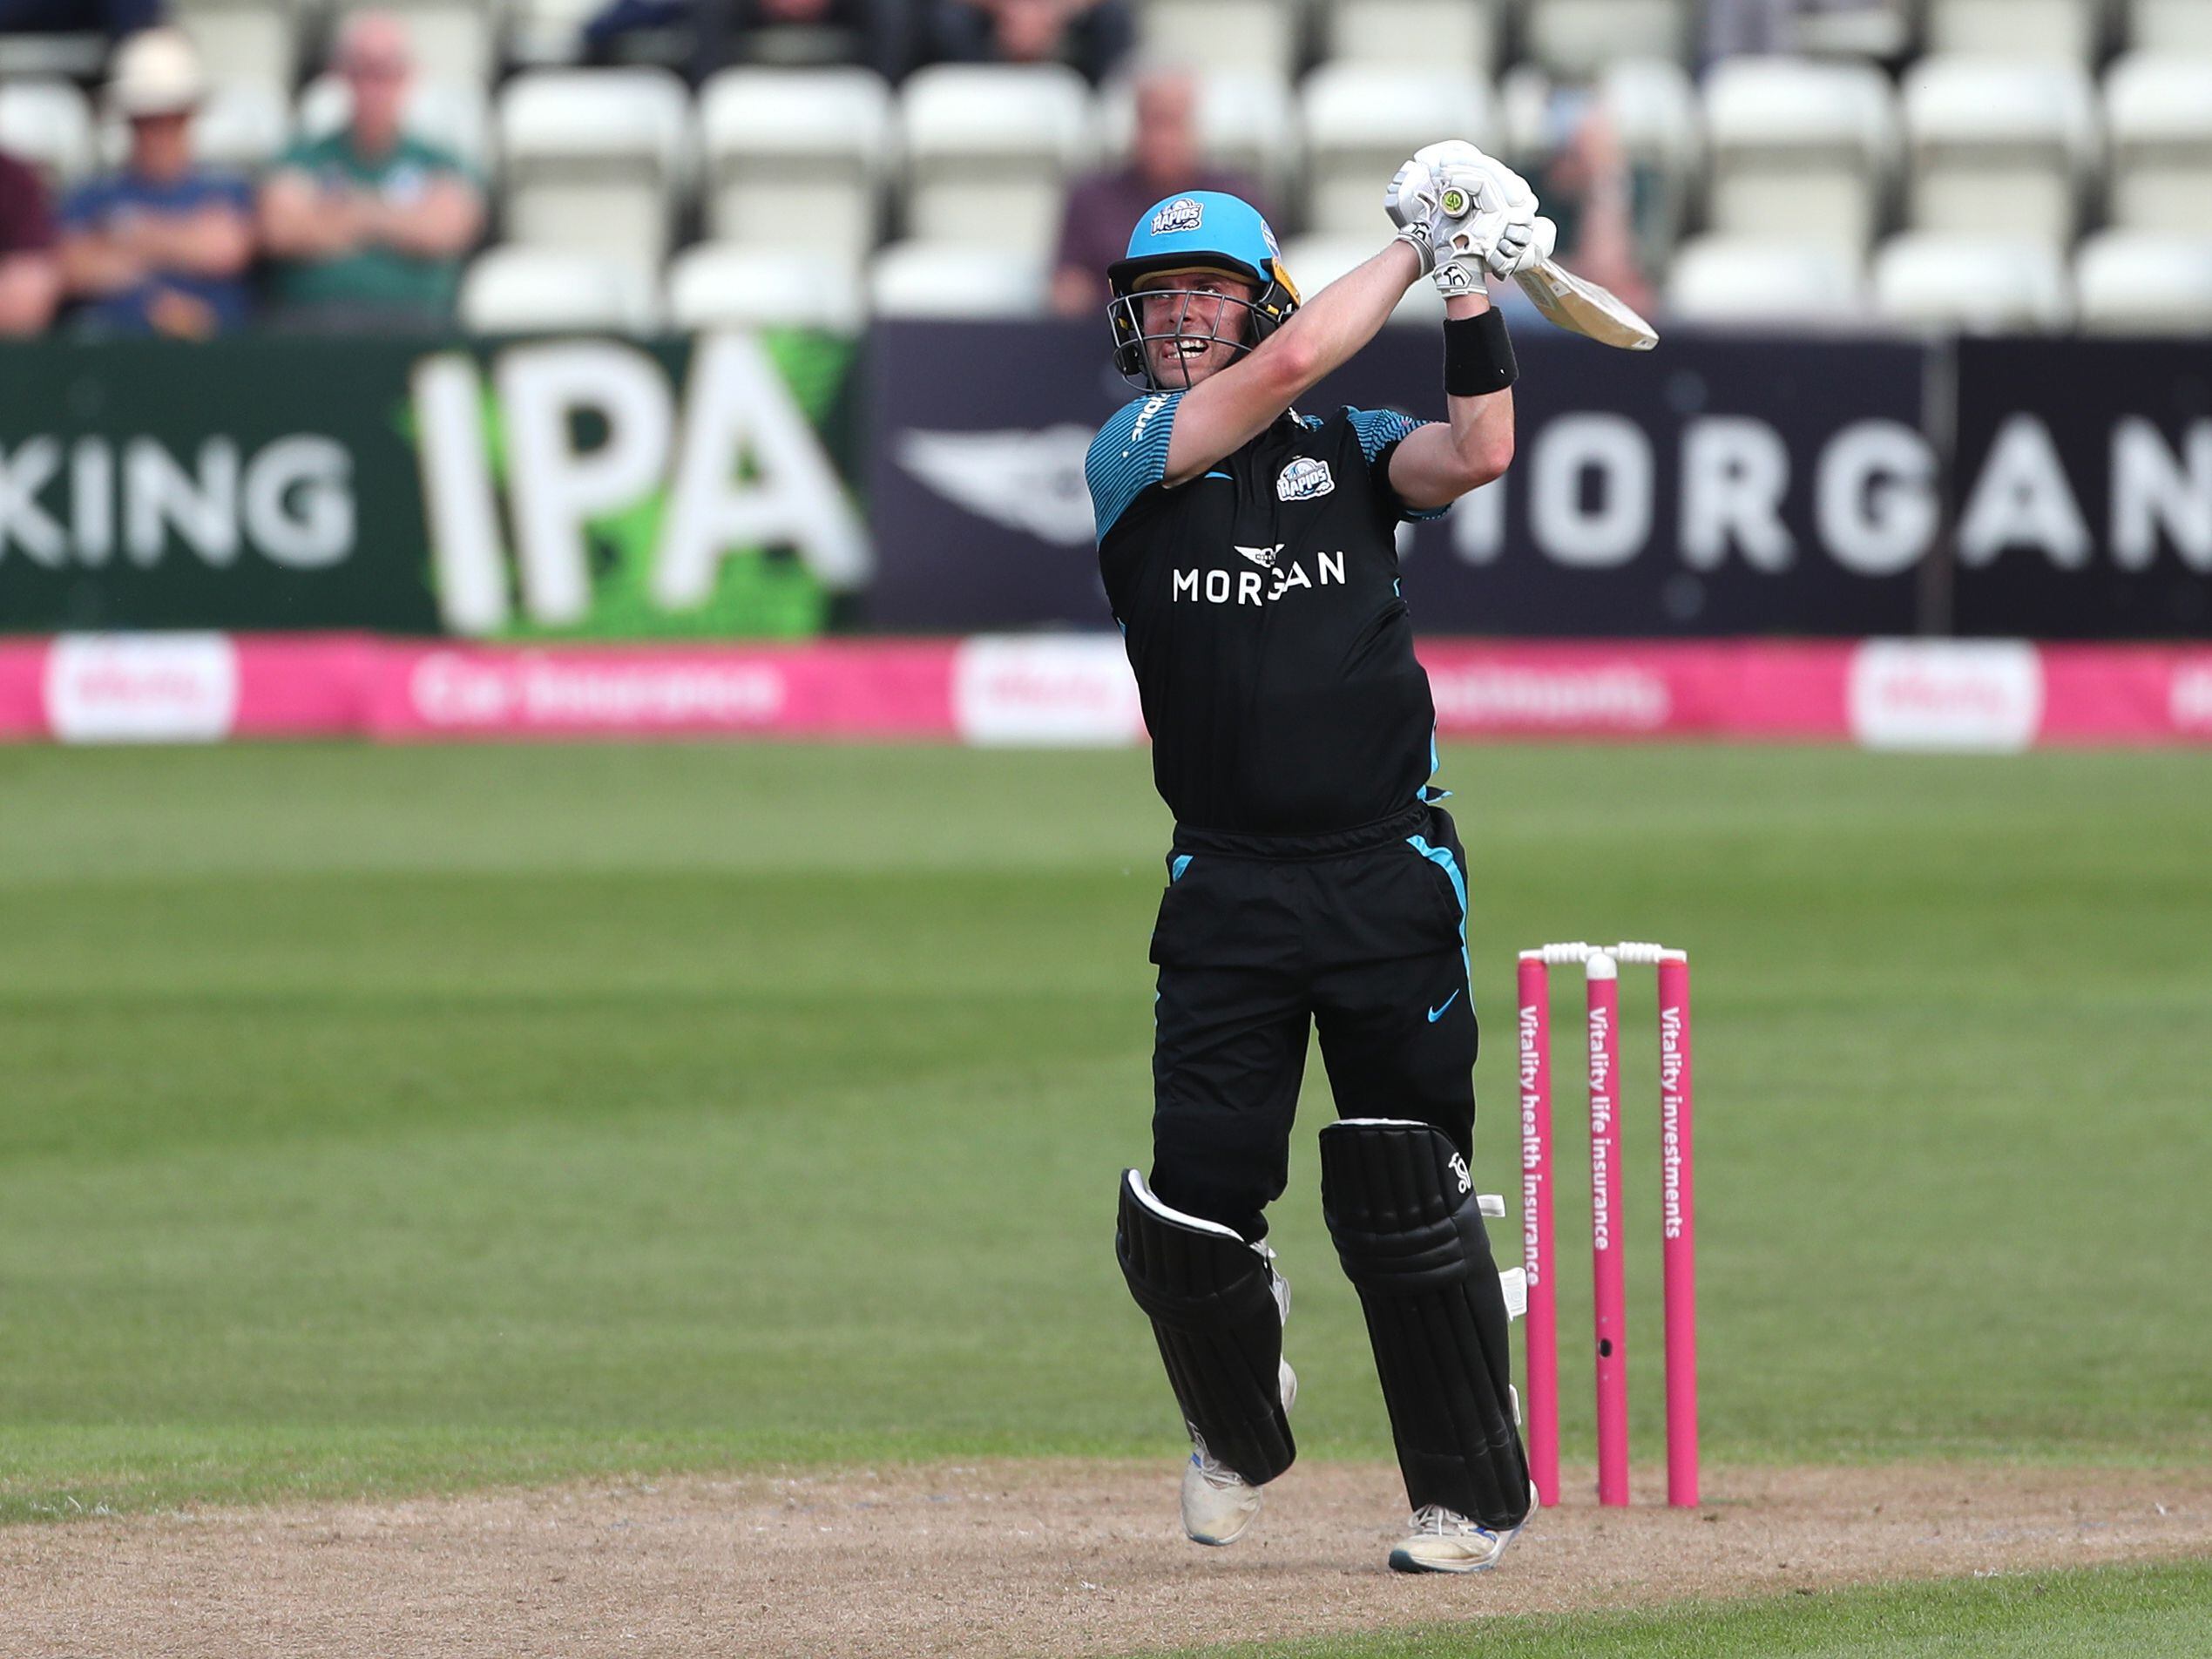 Skipper Libby leads the way for Worcestershire